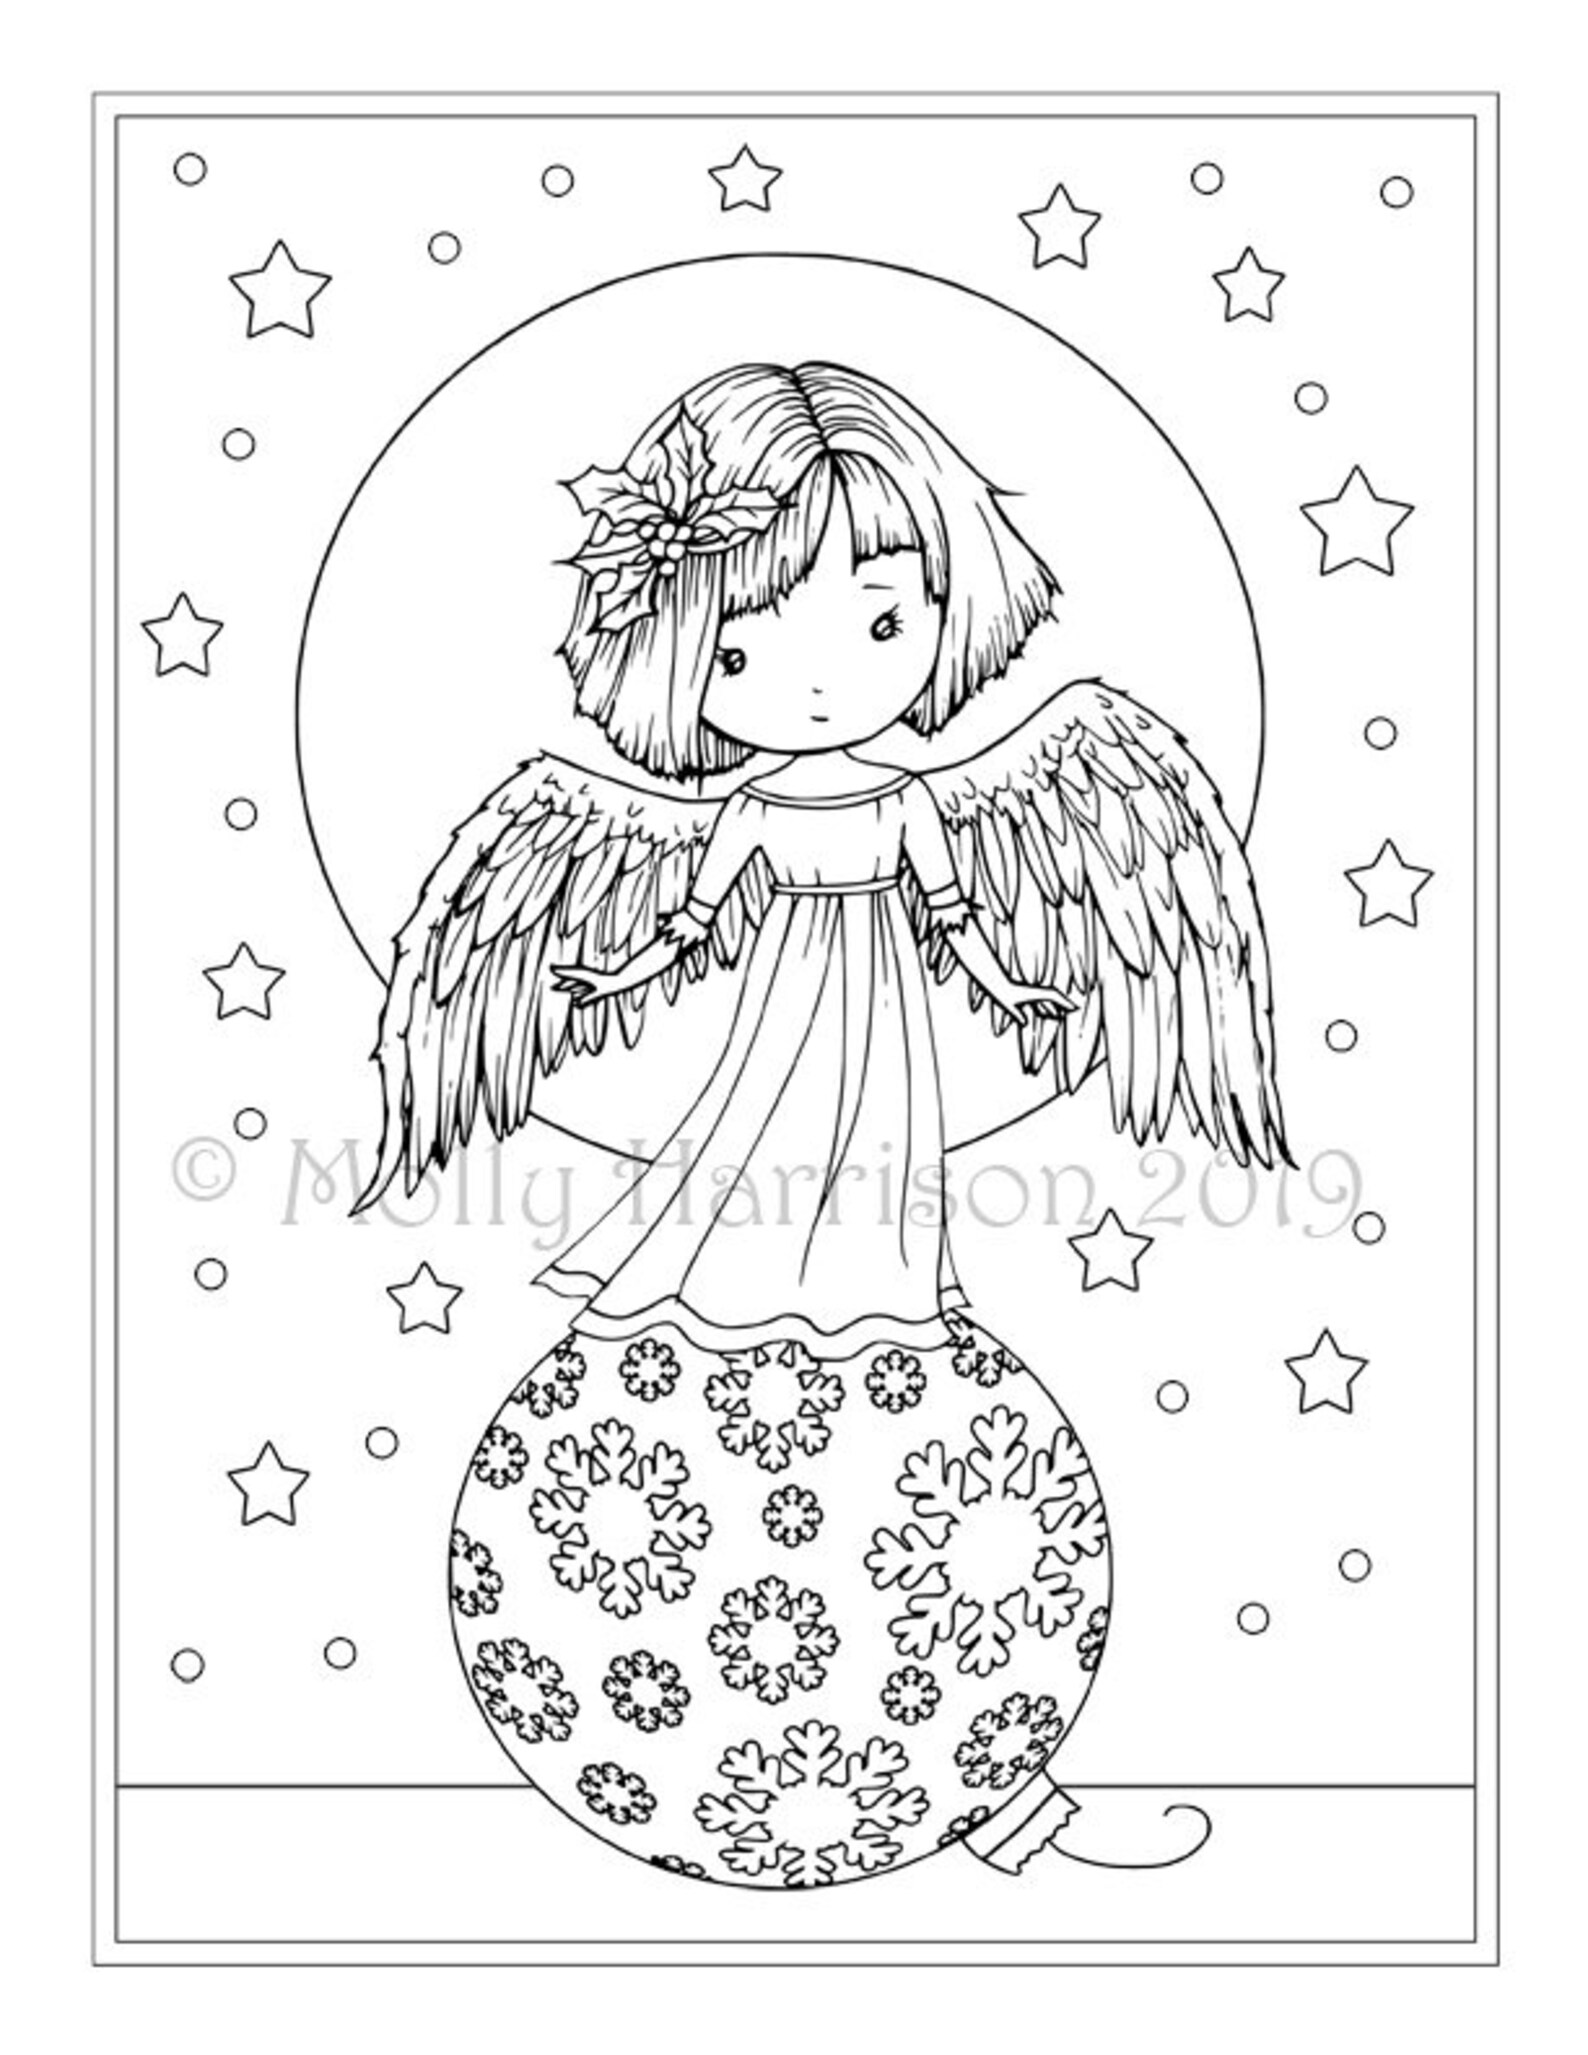 Exalted angel coloring by numbers